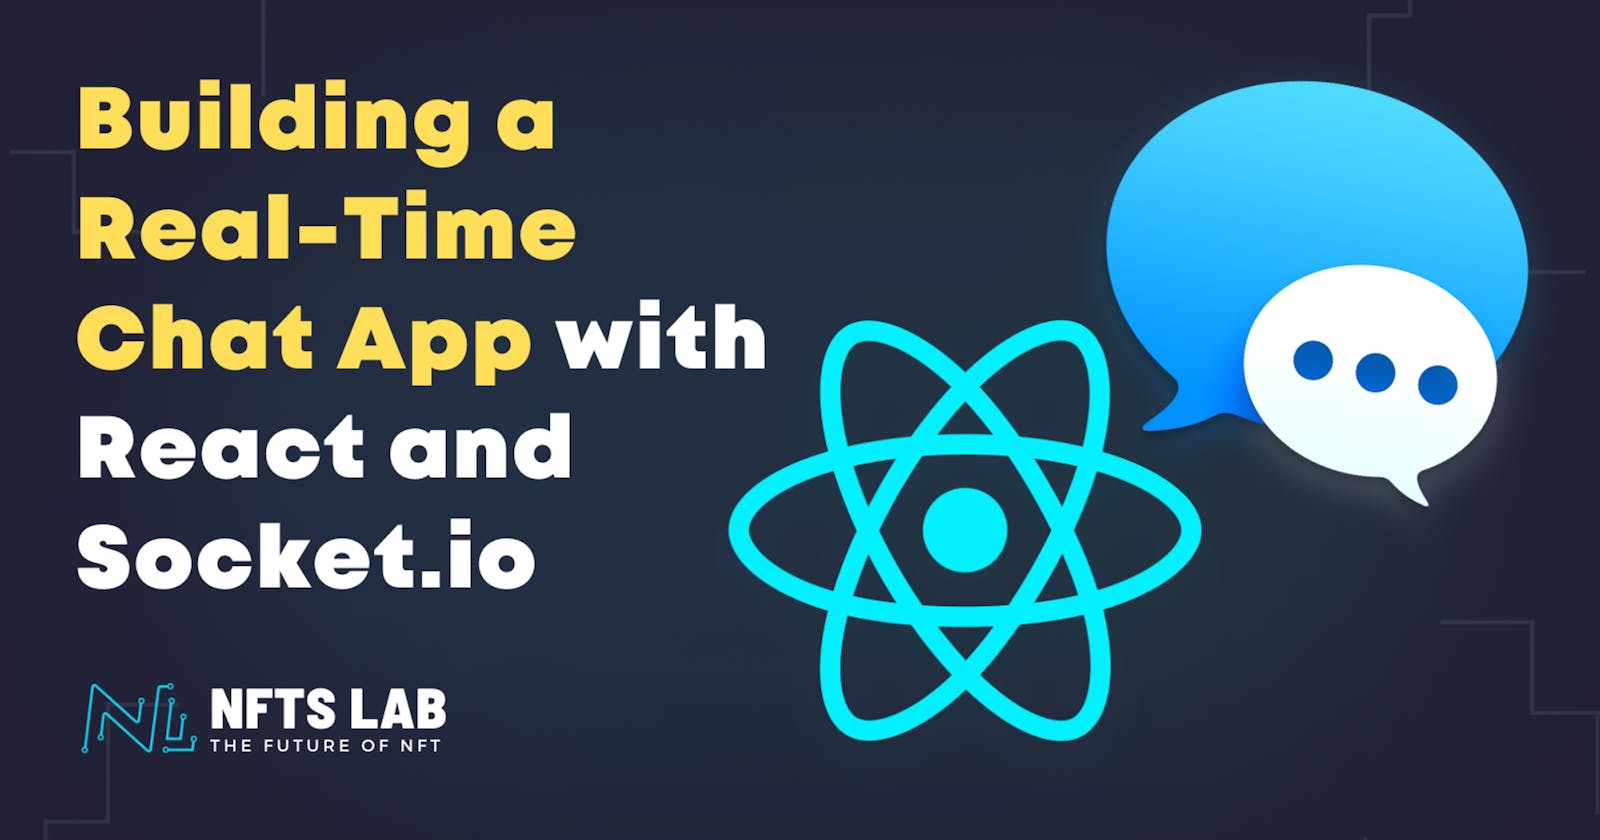 Building a Real-Time Chat App with React and Socket.io